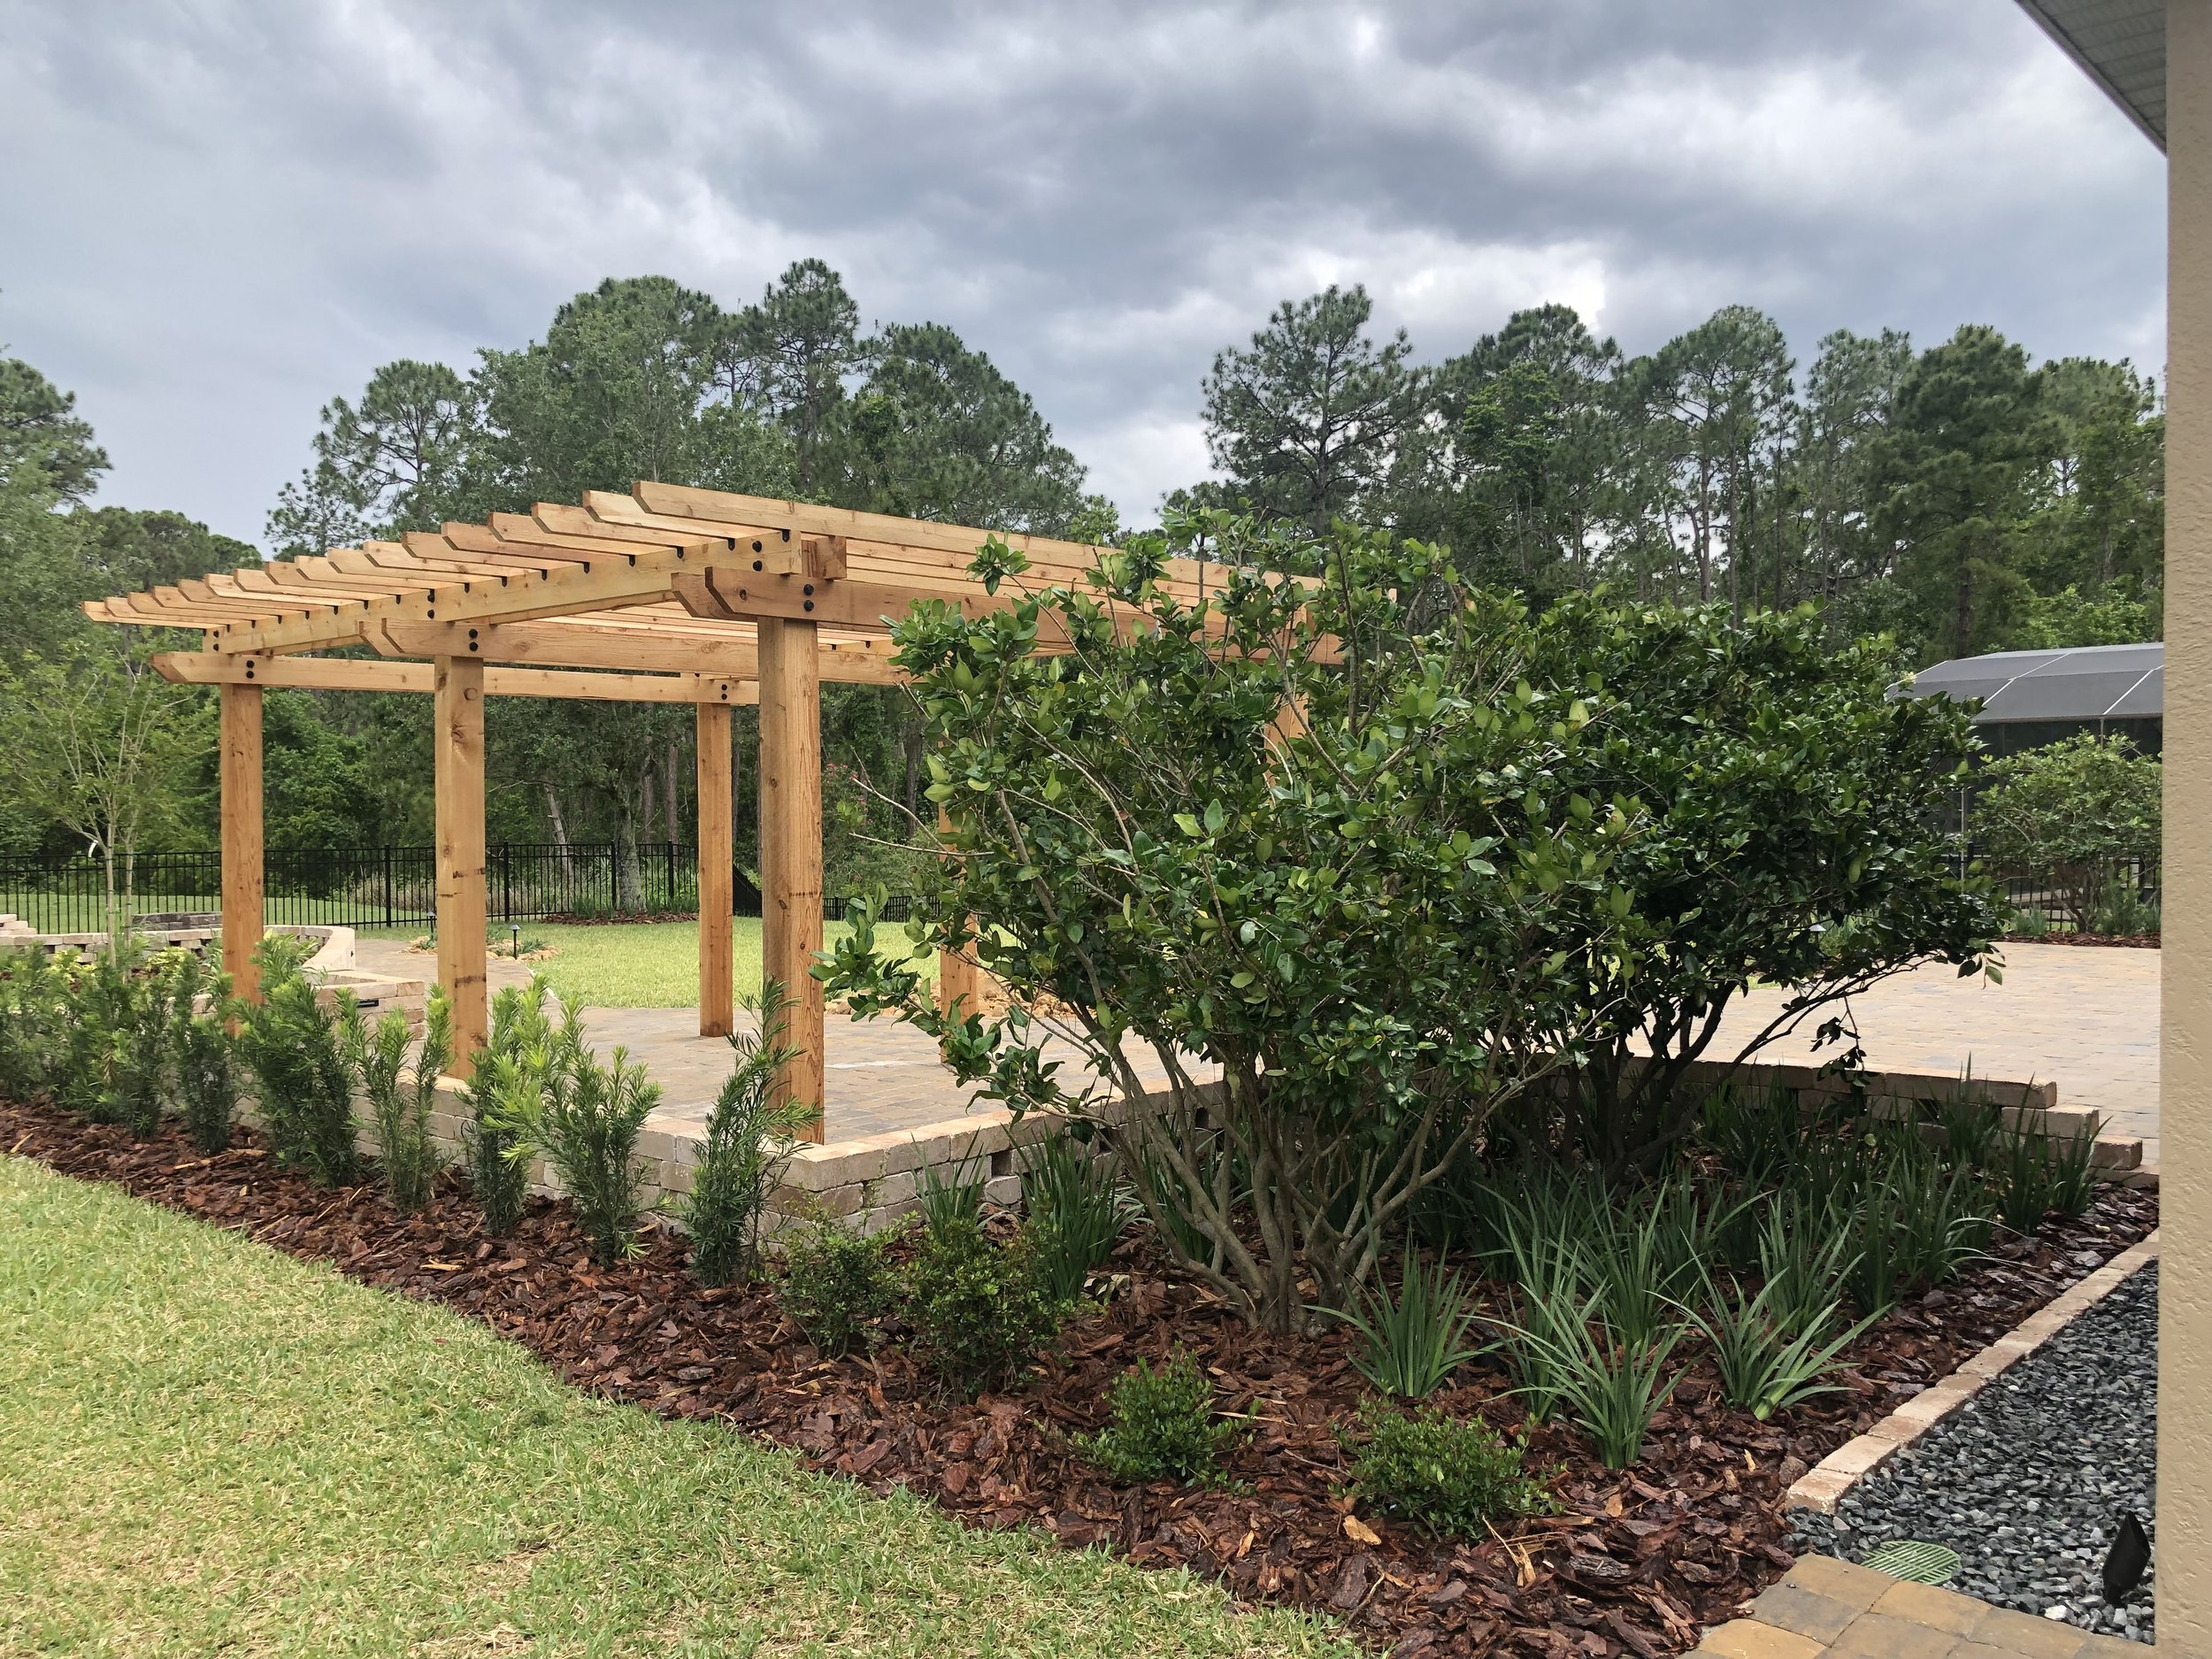 landscape_design_earthwise_horticultural_services_orlando_oviedo_sanford_winter_springs_pergola_pavers_retaining_wall_florida.jpg